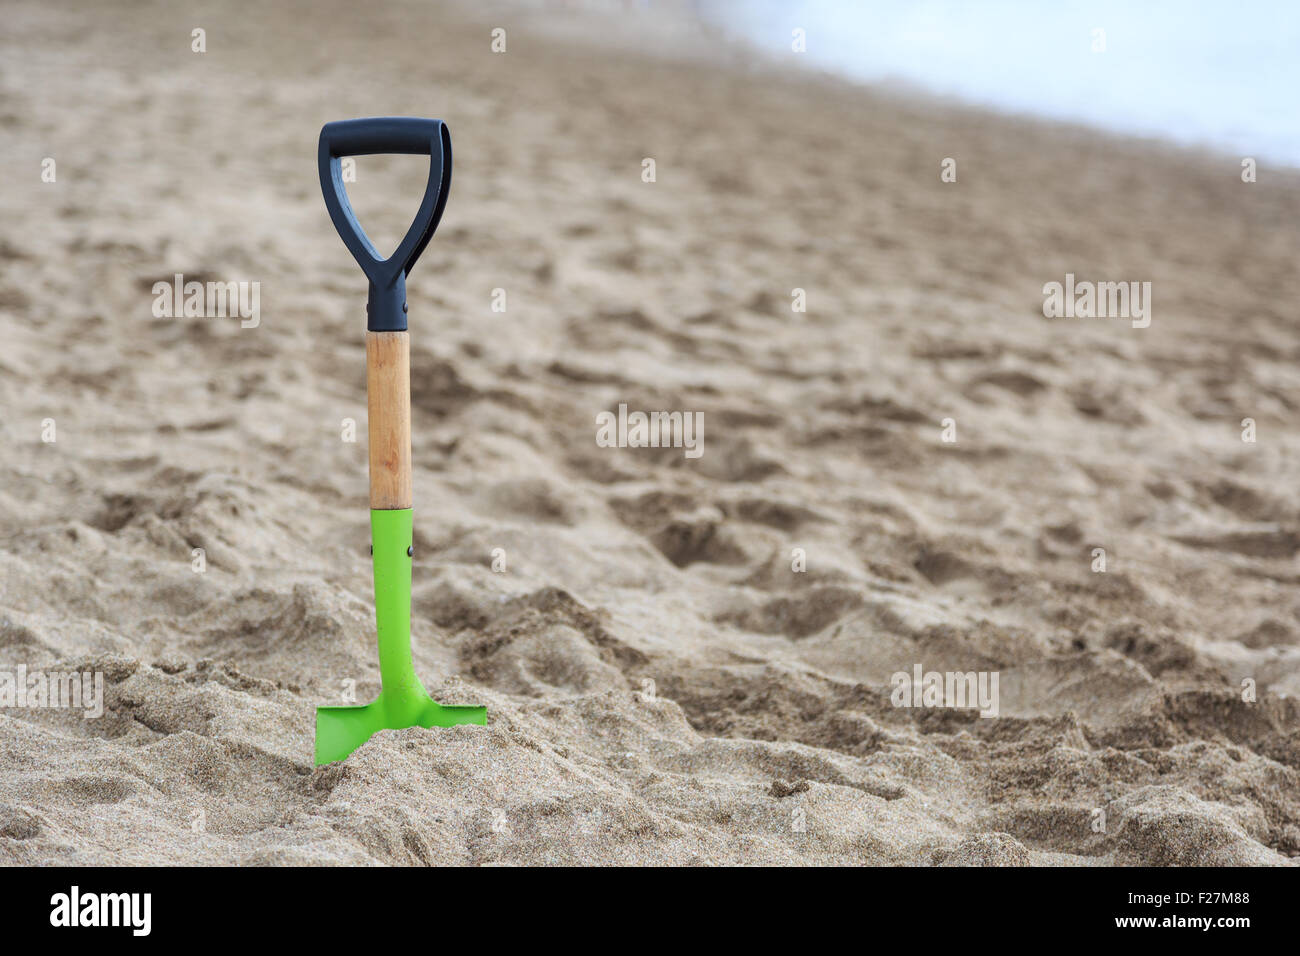 A lime green spade in in the sand of hotwater beach near Hahei, New Zealand Stock Photo